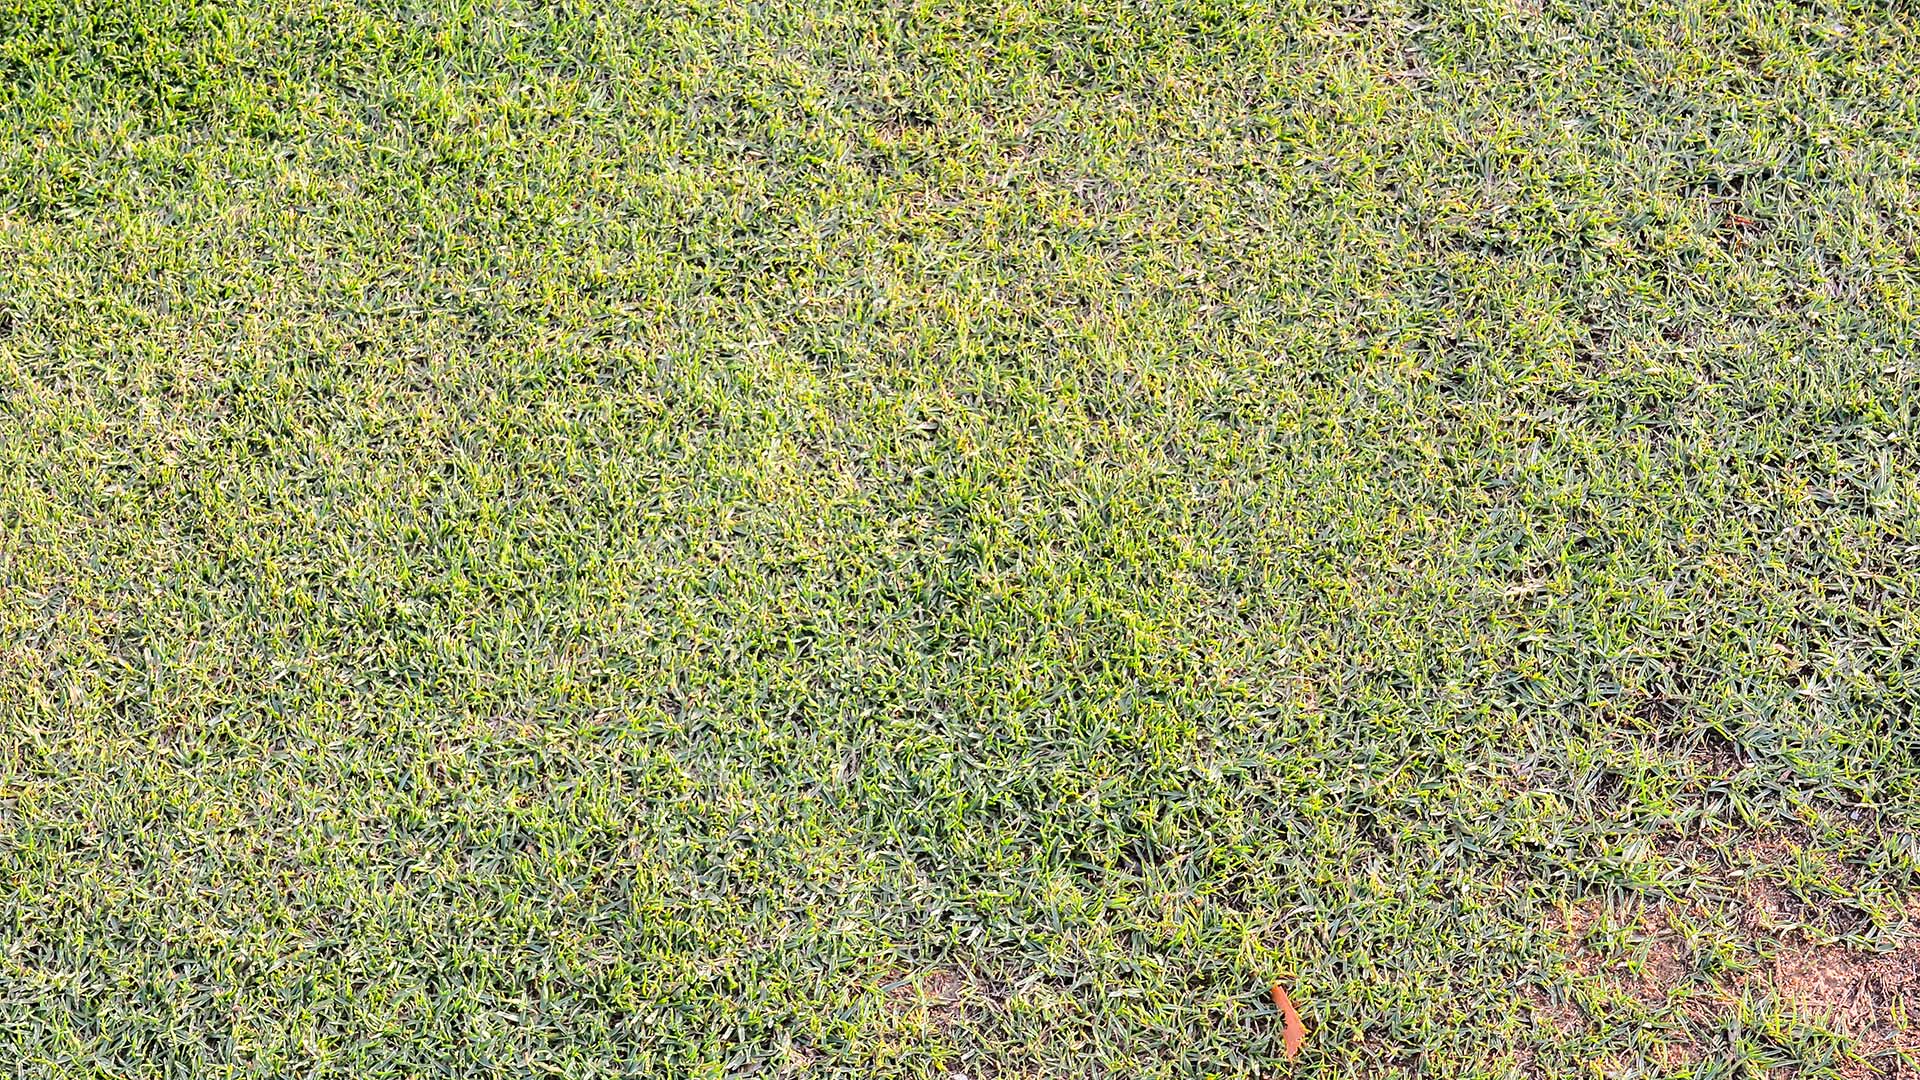 A lawn suffering from grey leaf spot and in need of treatment in Allen, TX.